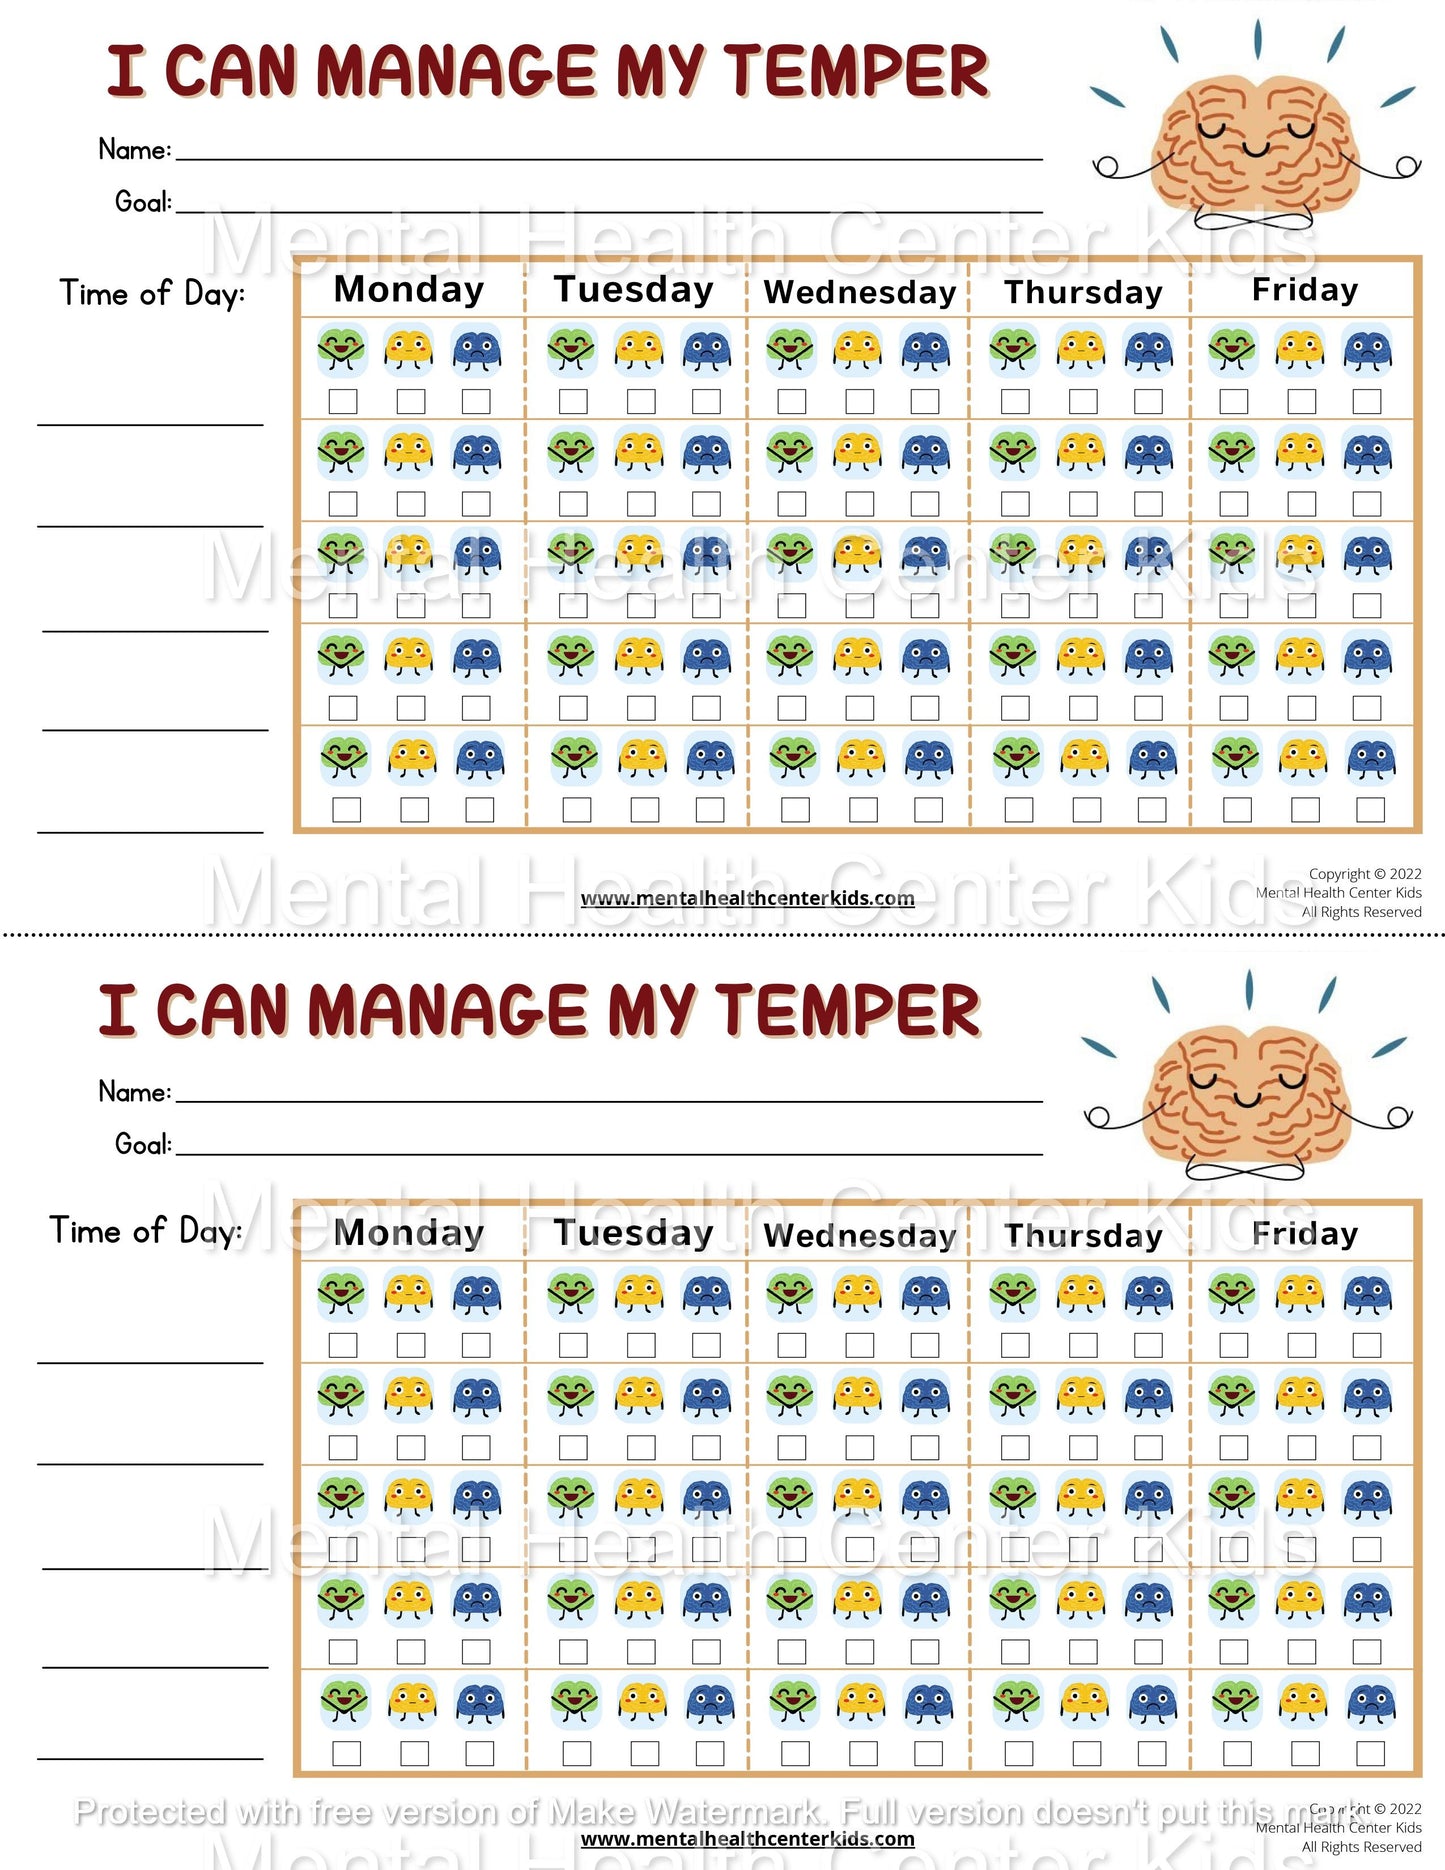 I Can Manage My Temper